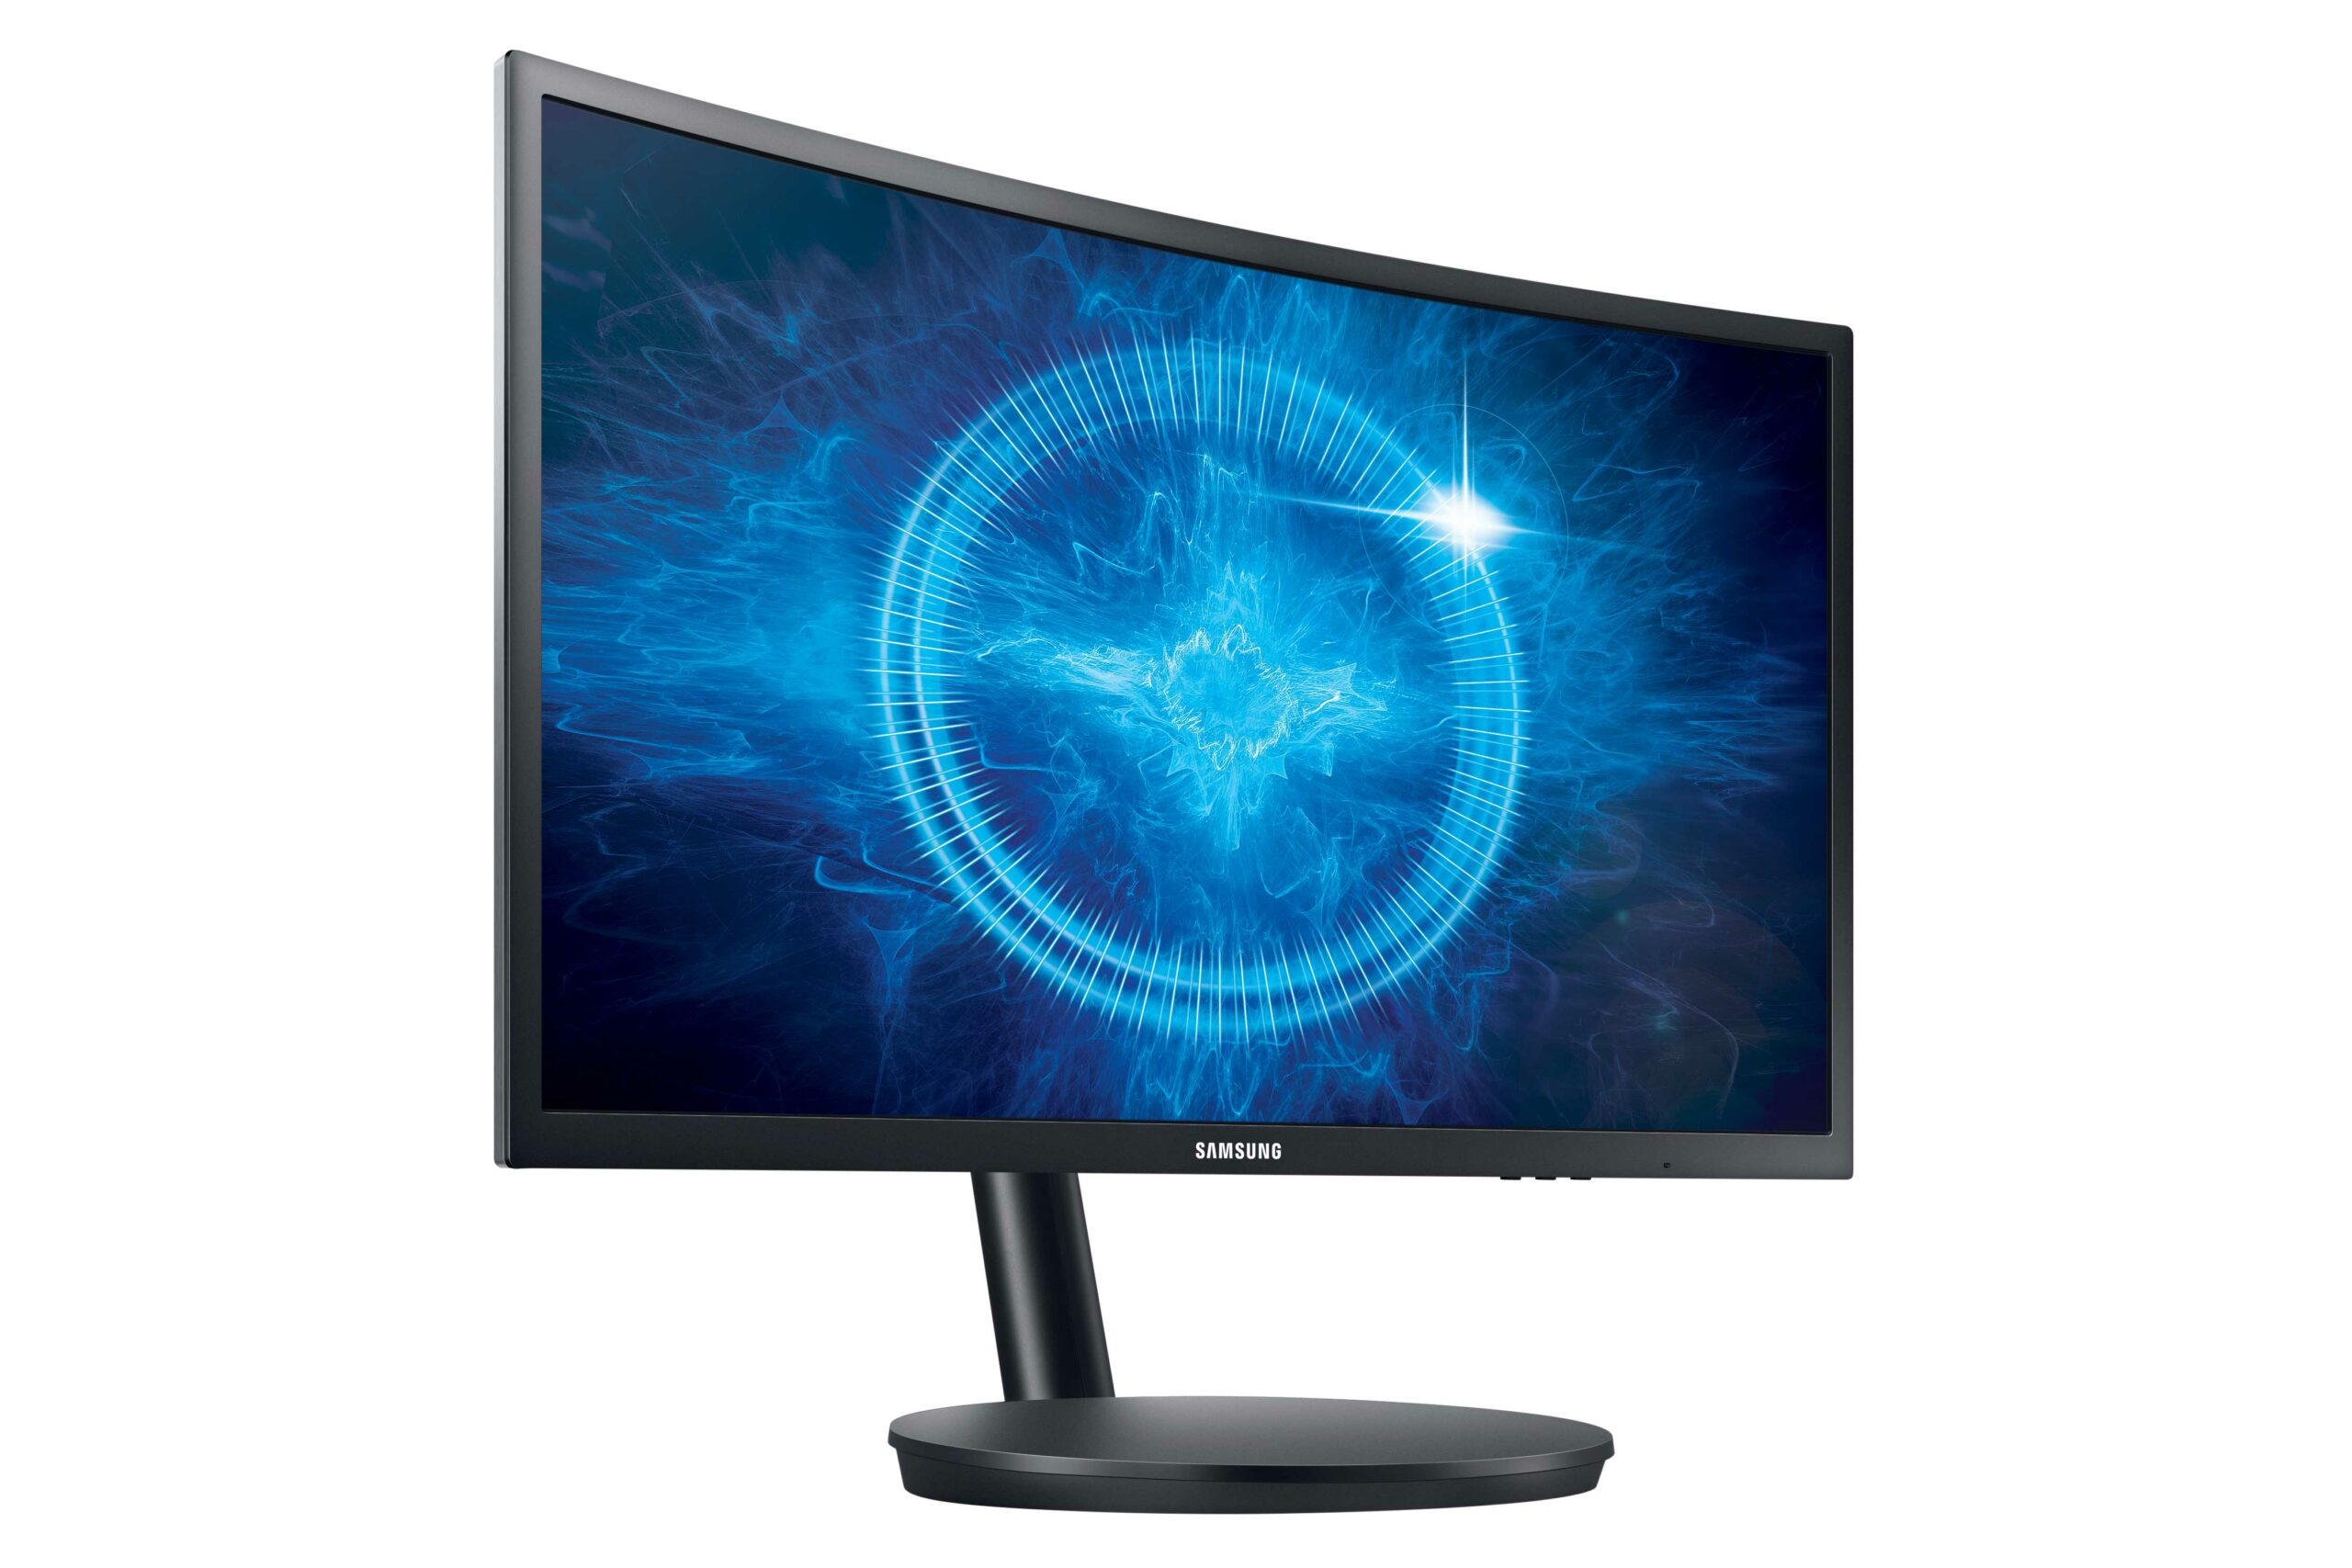 Samsung launches curved gaming monitor in India starting at Rs 35,000